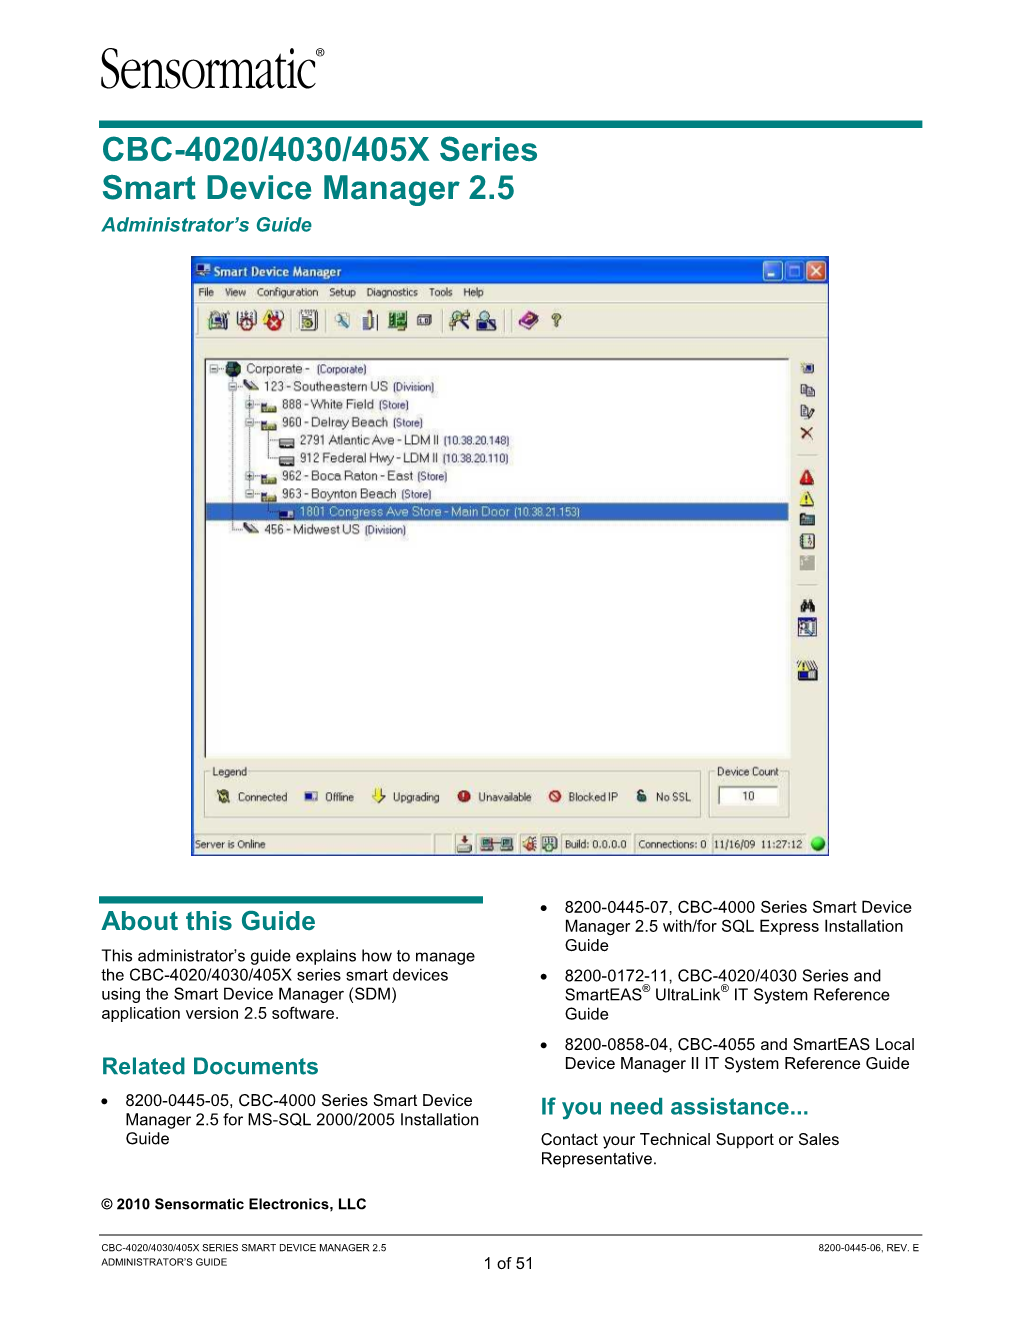 CBC-4020/4030/405X Series Smart Device Manager 2.5 Administrator's Guide, 8200-0445-06